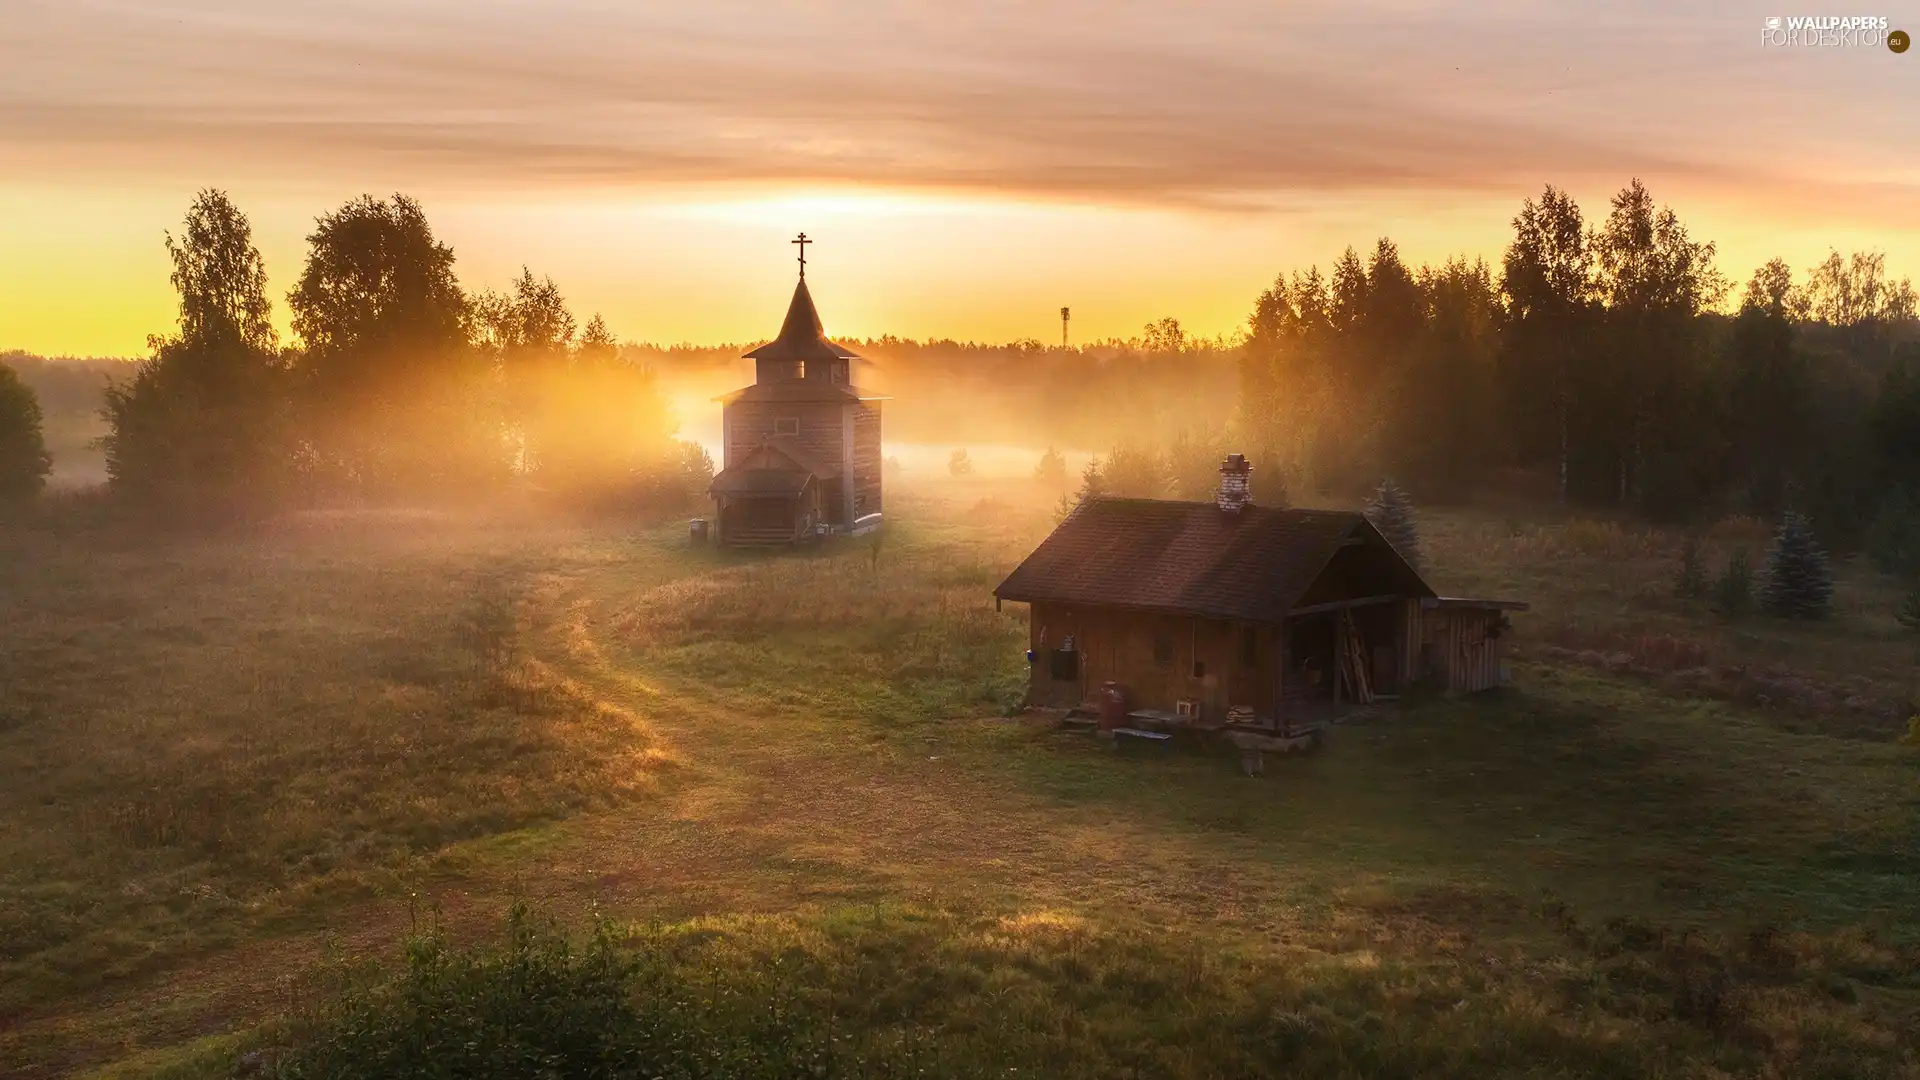 Houses, chapel, viewes, church, trees, country, Sunrise, Fog